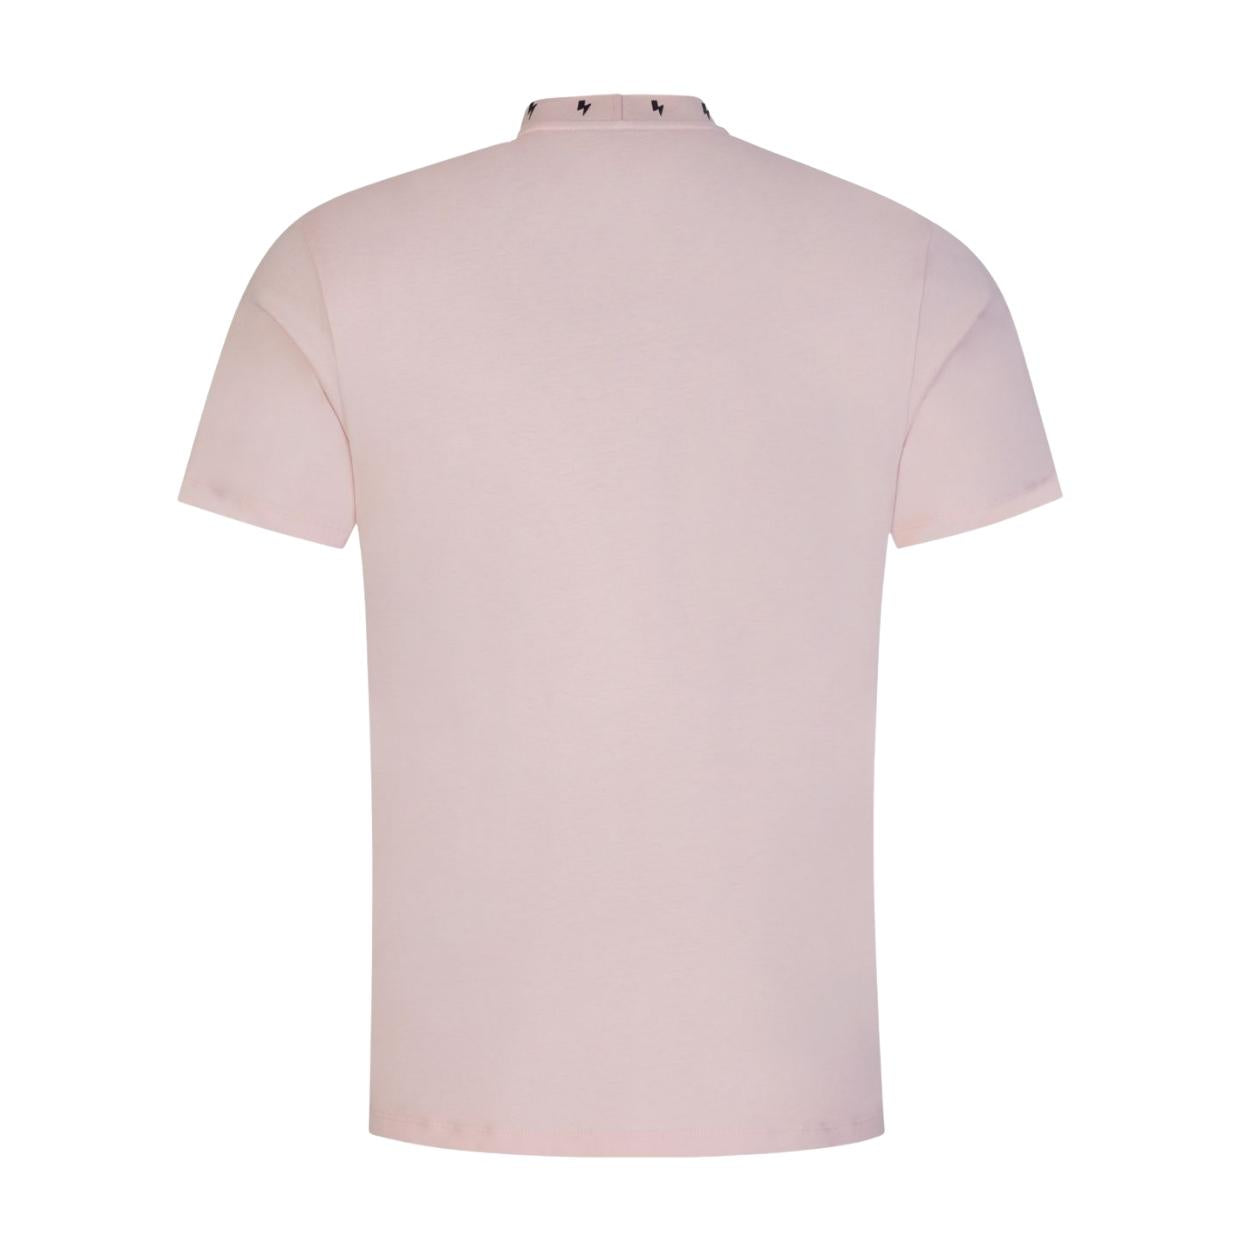 Neil Barrett Salmon Bolted Ribbed Collared T-Shirt